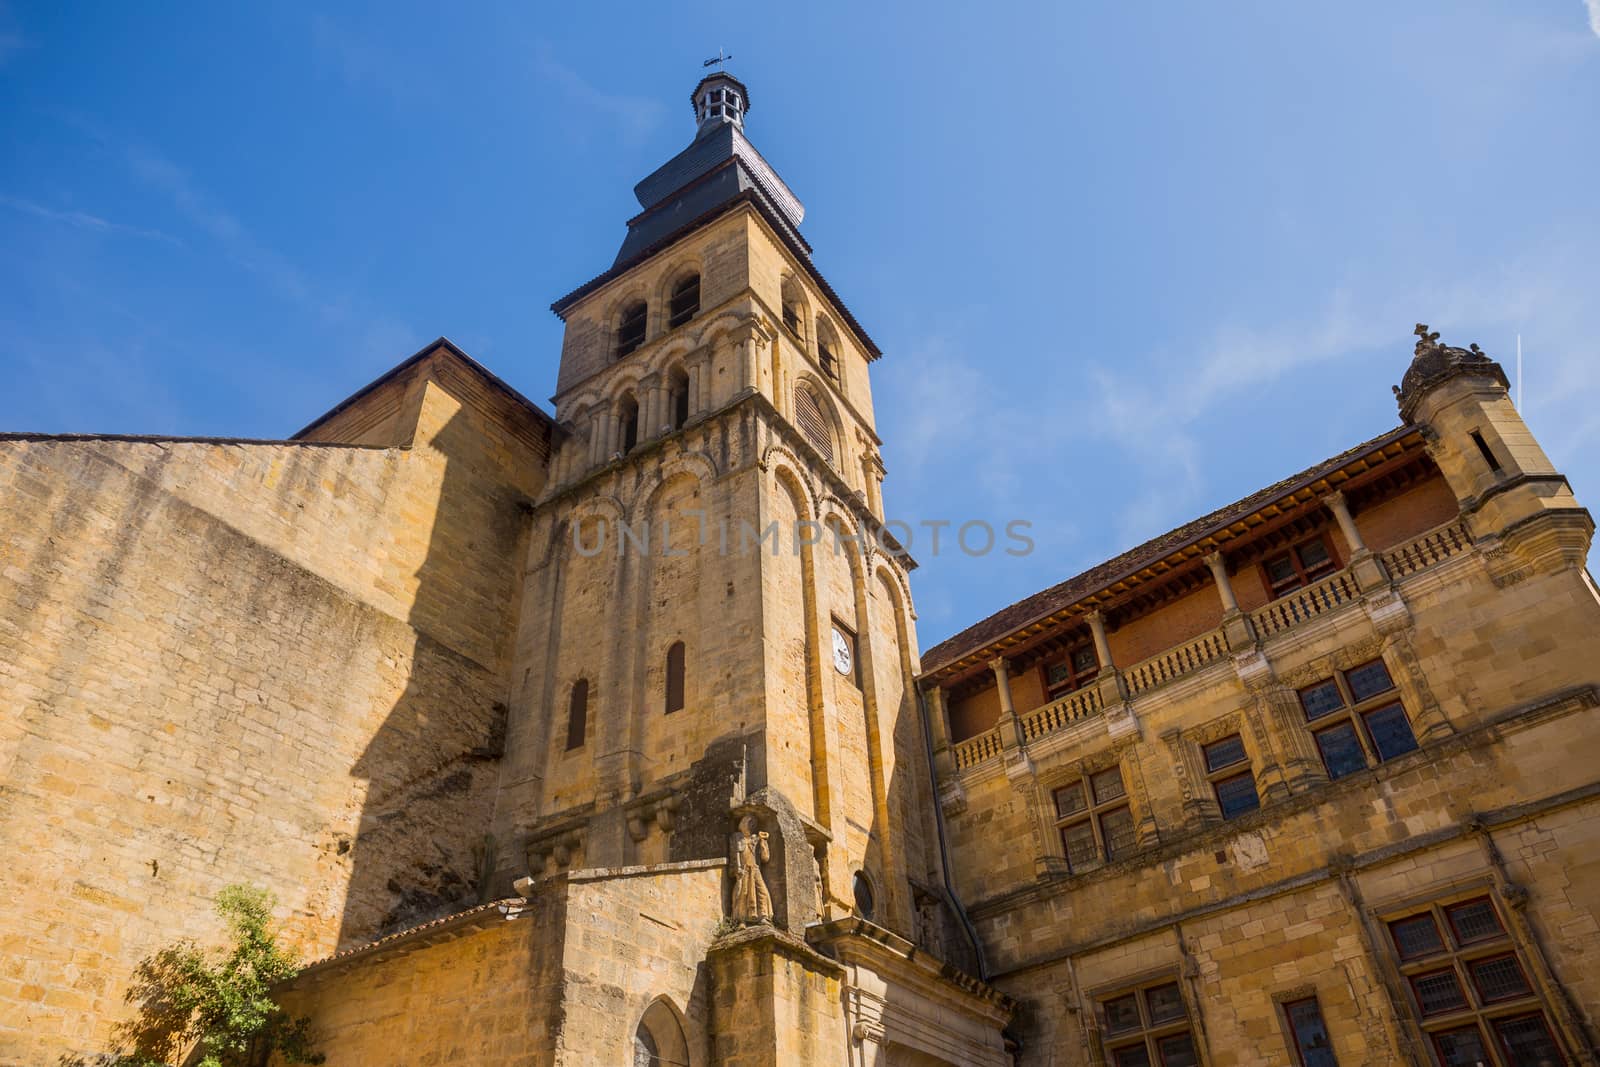 Sarlat Cathedral is a Roman Catholic church and former cathedral located in Sarlat-la-Caneda, France.